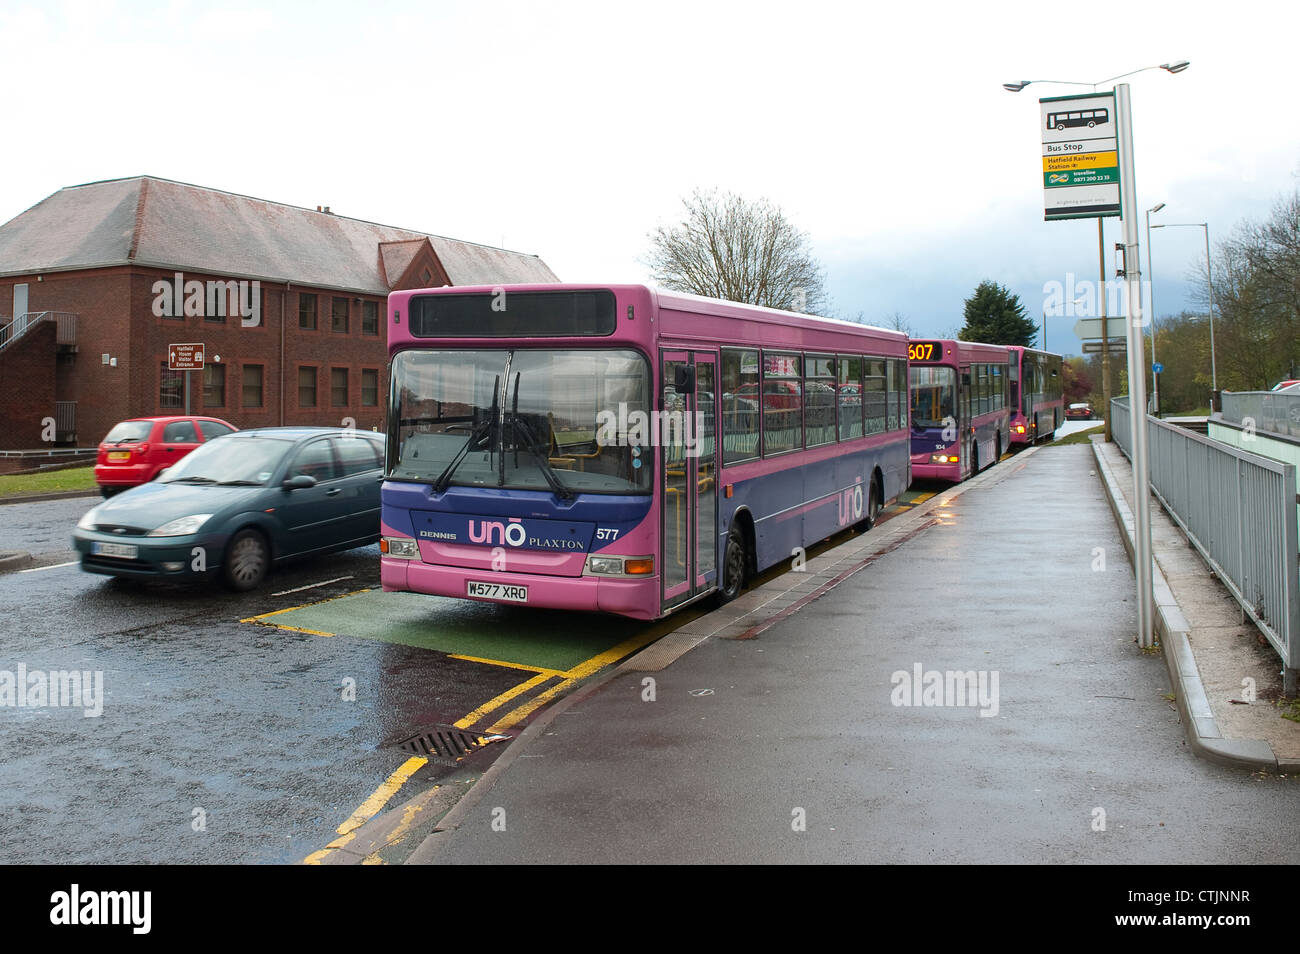 Buses in Uno livery wating behind at a bus stop outside Hatfield Railway Station, England. Stock Photo